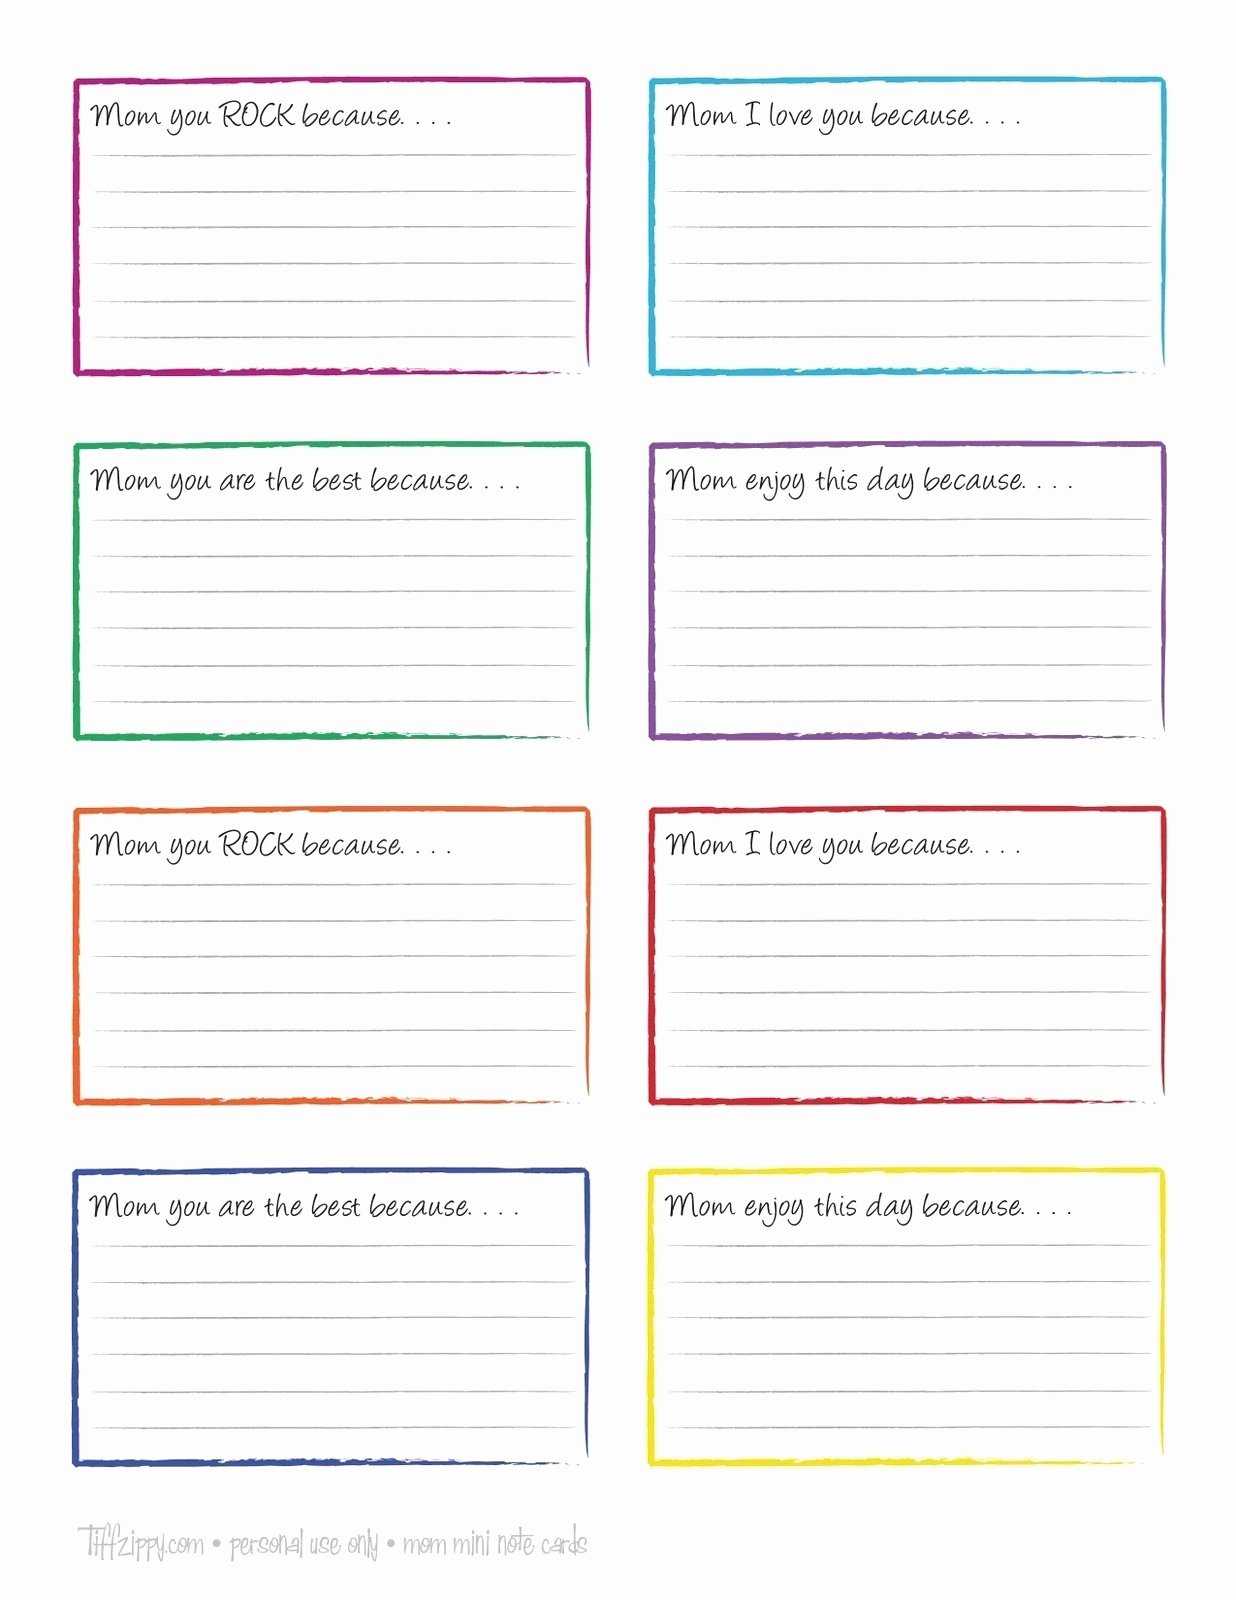 30 Note Card Template Google Docs | Pryncepality Inside 4X6 Note Card Template Word